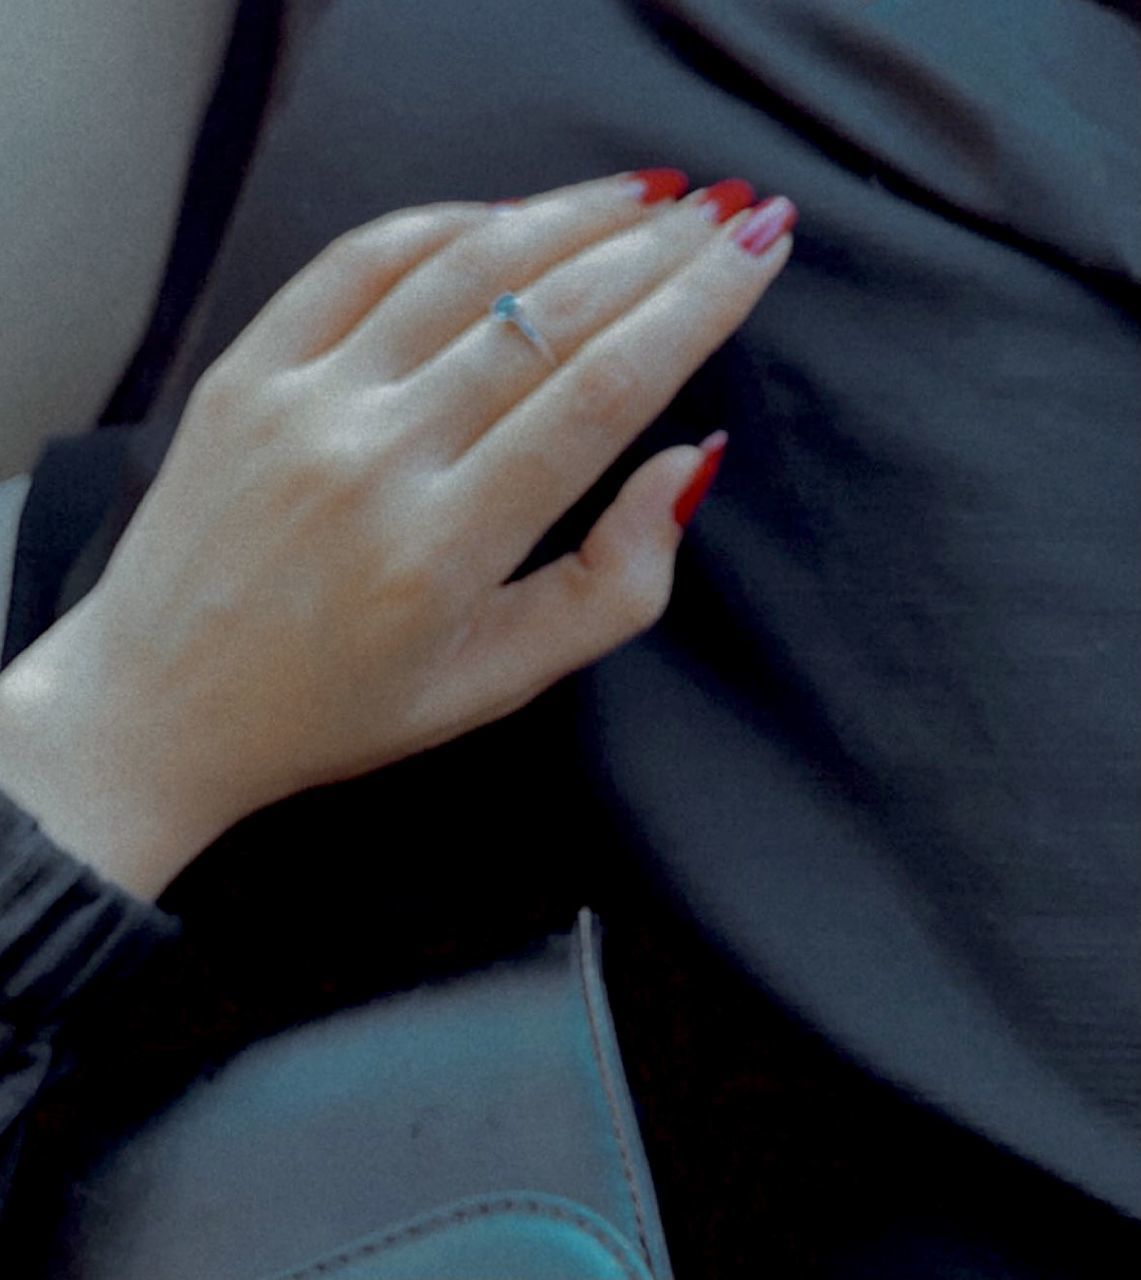 CLOSE-UP OF HAND ON WOMAN